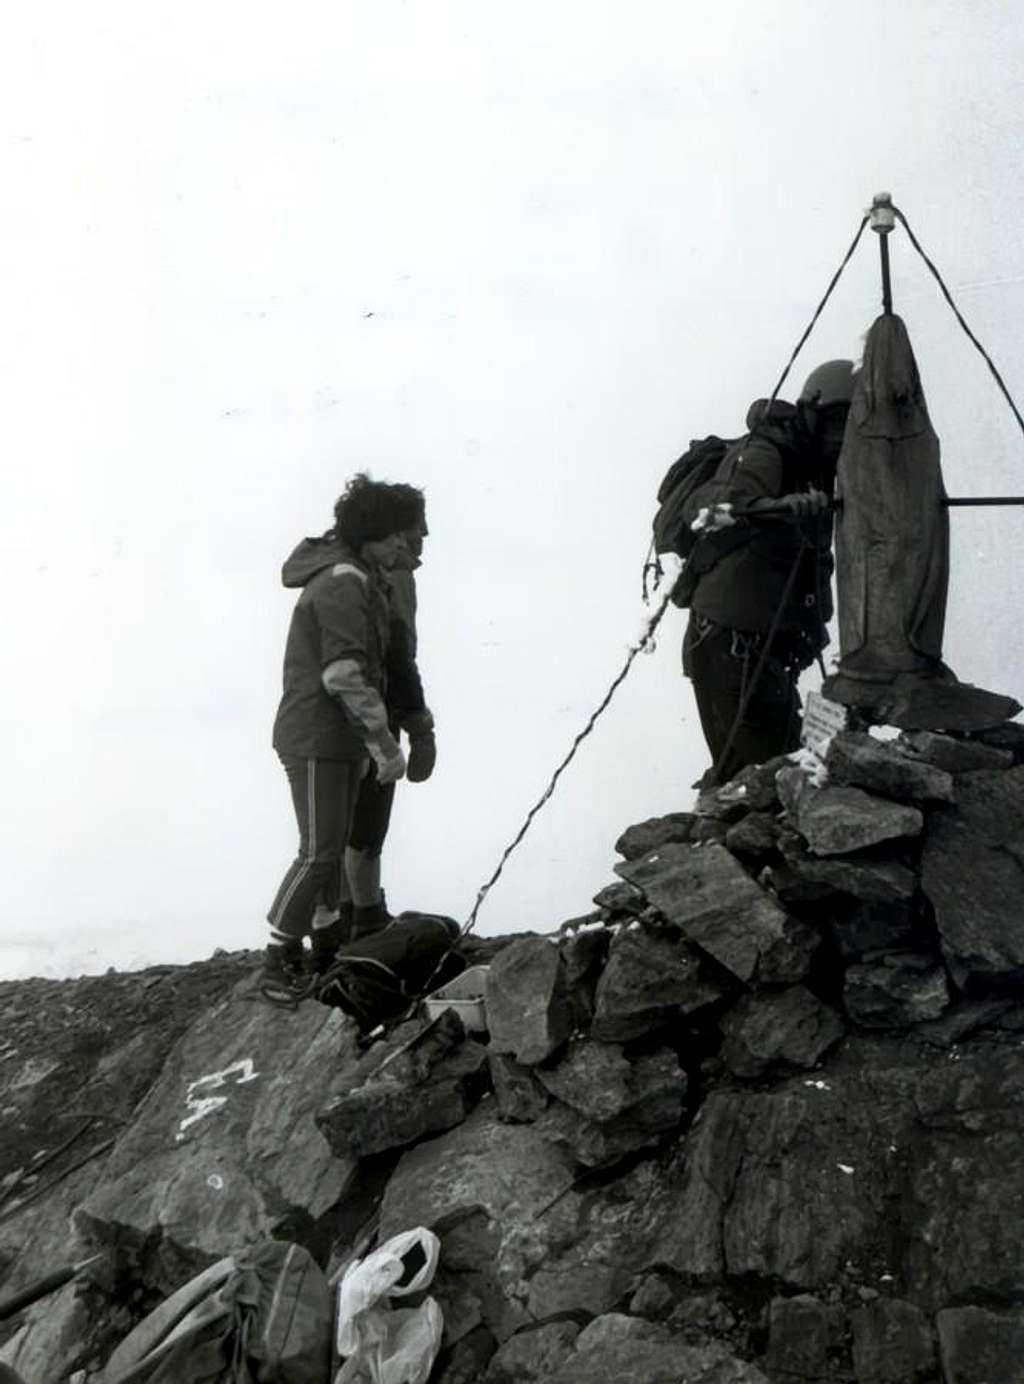 Le FOUDRE Arriving on Summit after North Wall 1980